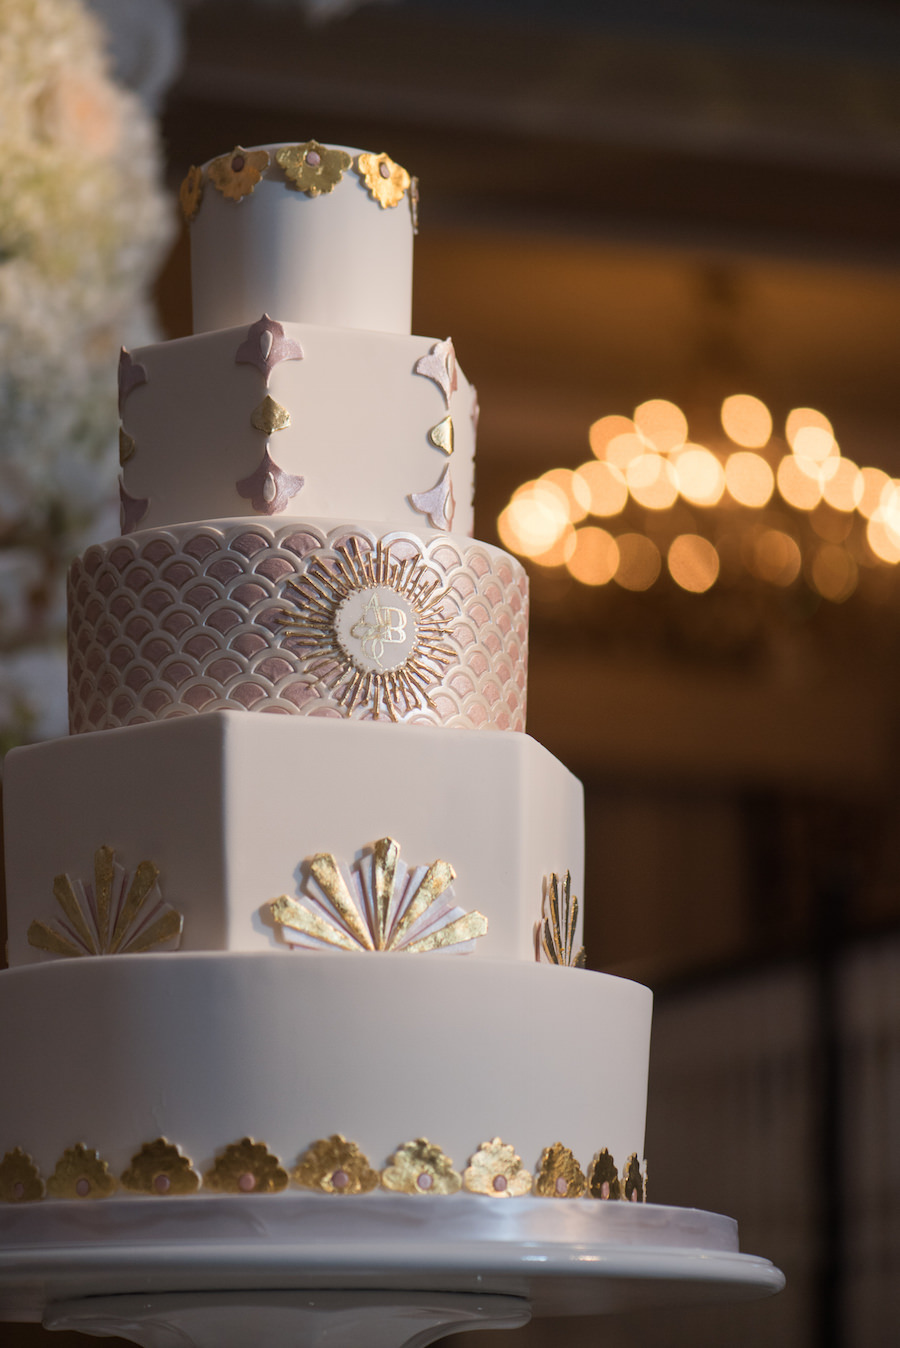 Five Tiered Great Gatbsy Roaring 20s Inspired Wedding Cake with Gold Rose Gold and Silver Accents | Tampa Wedding Cakes and Desserts Hands on Sweets